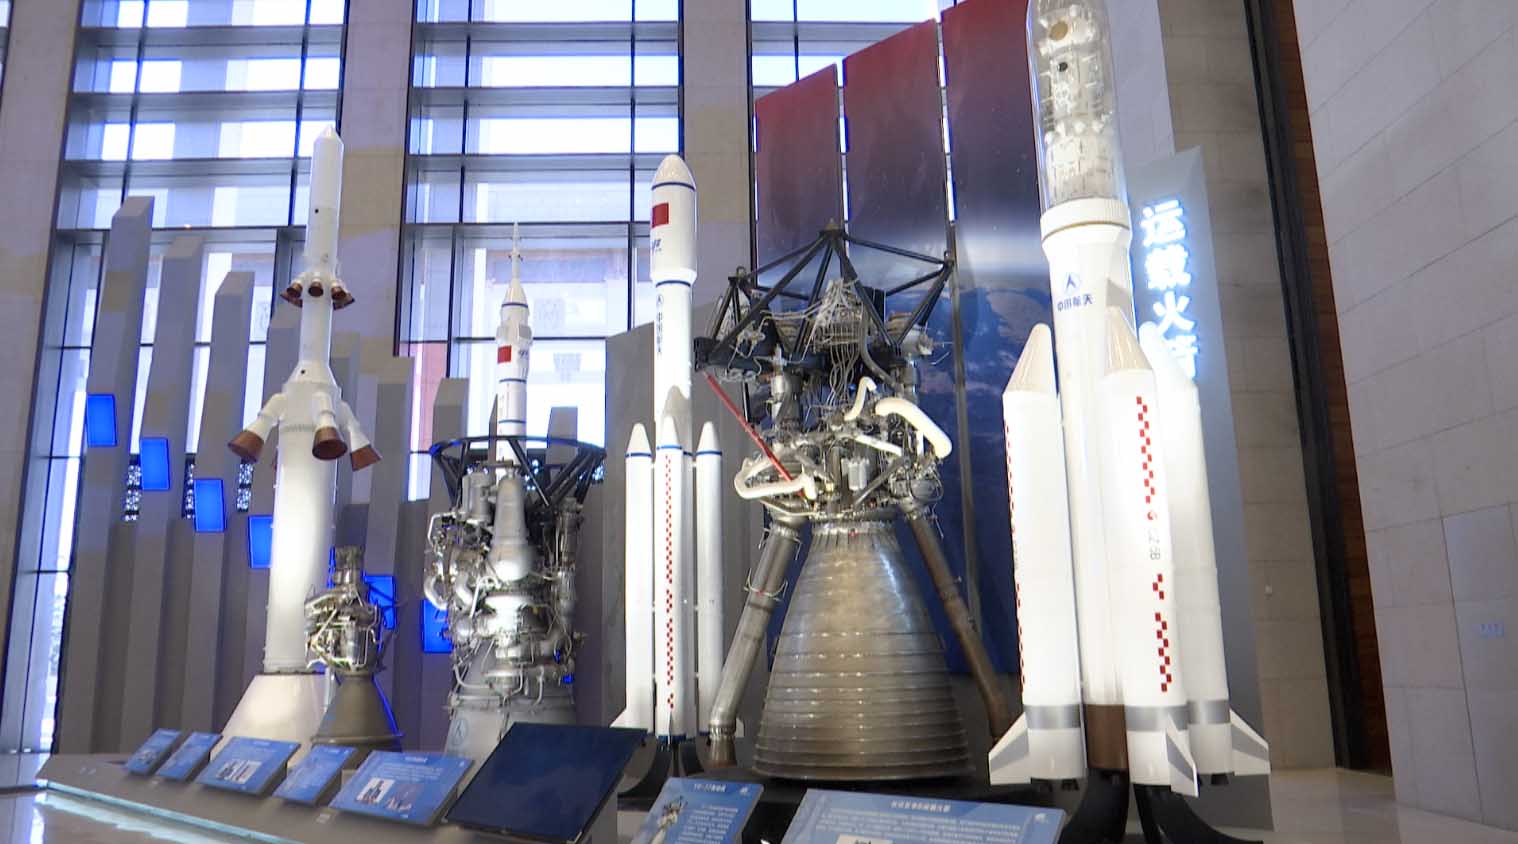 Models of China's Long March rocket series are displayed at an exhibition in Beijing, China, February 24, 2023. /CGTN